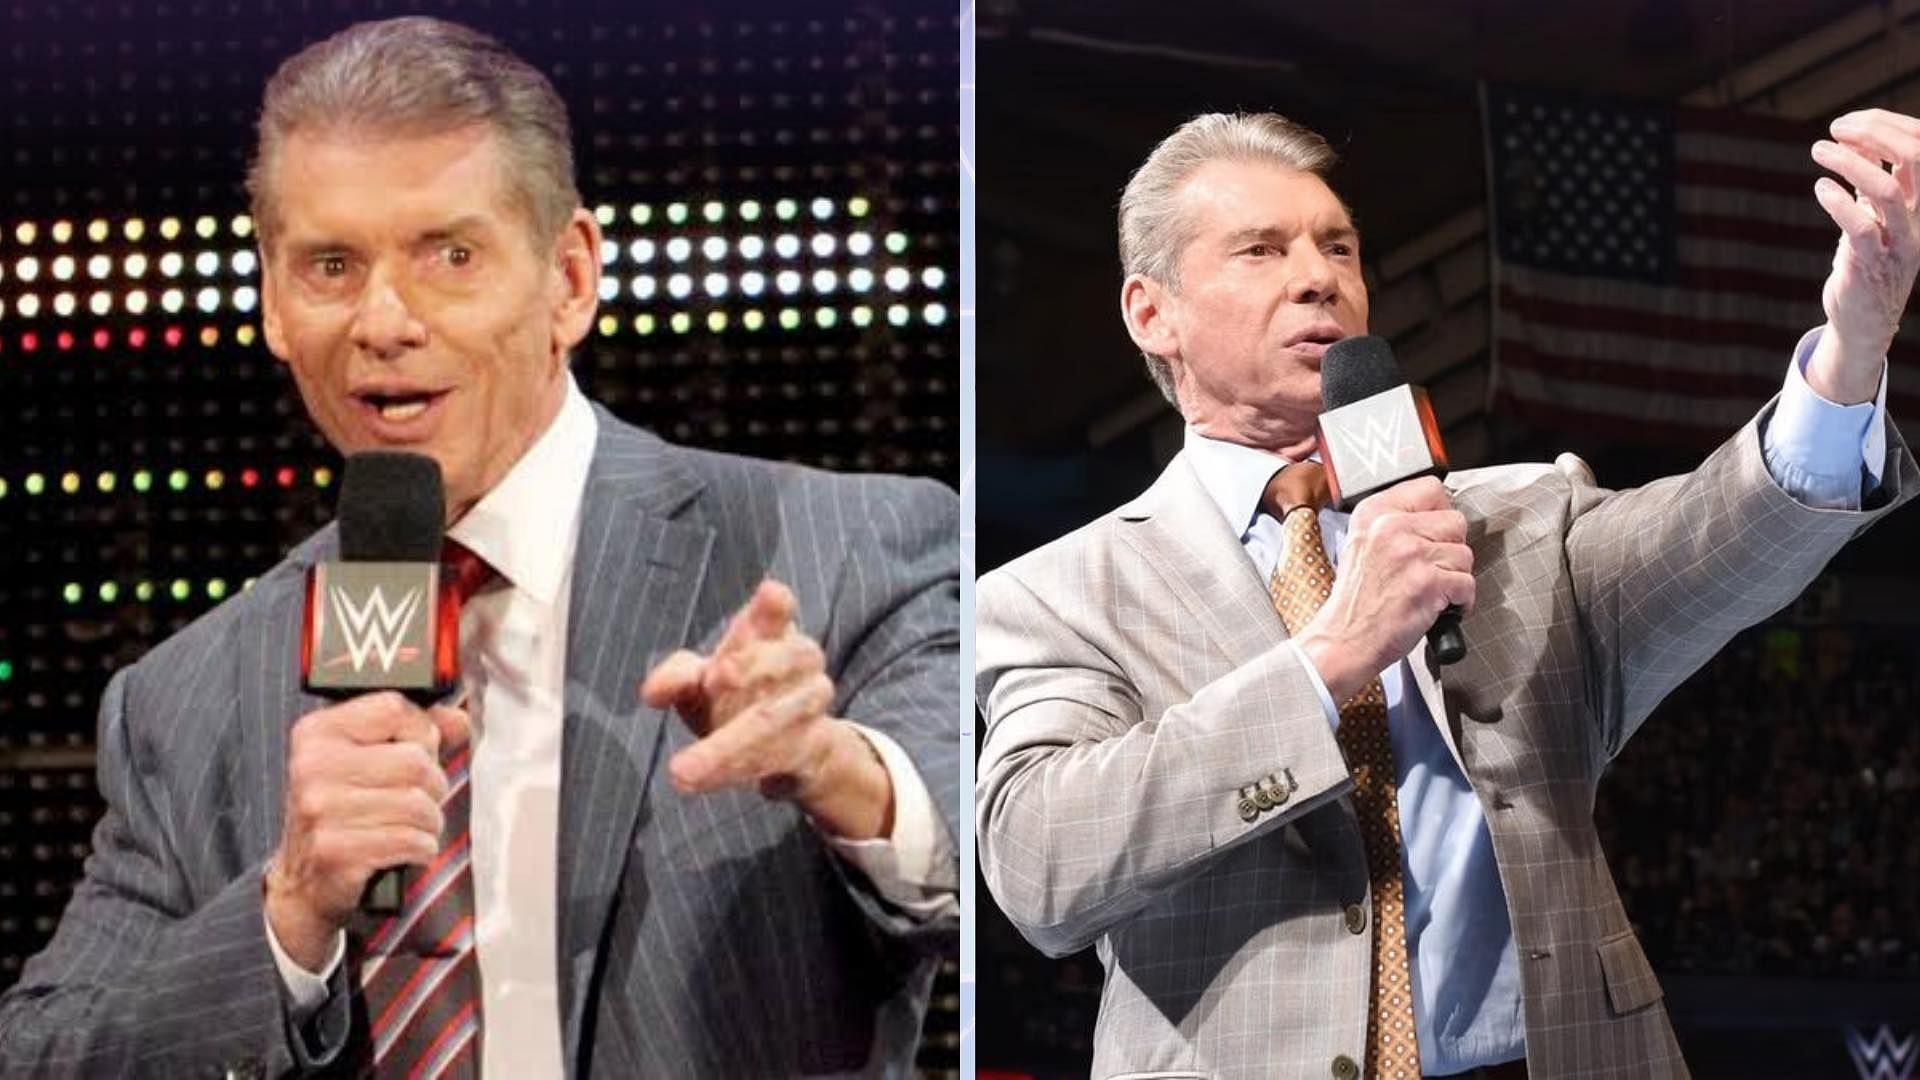 Vince McMahon recently sold even more TKO stock